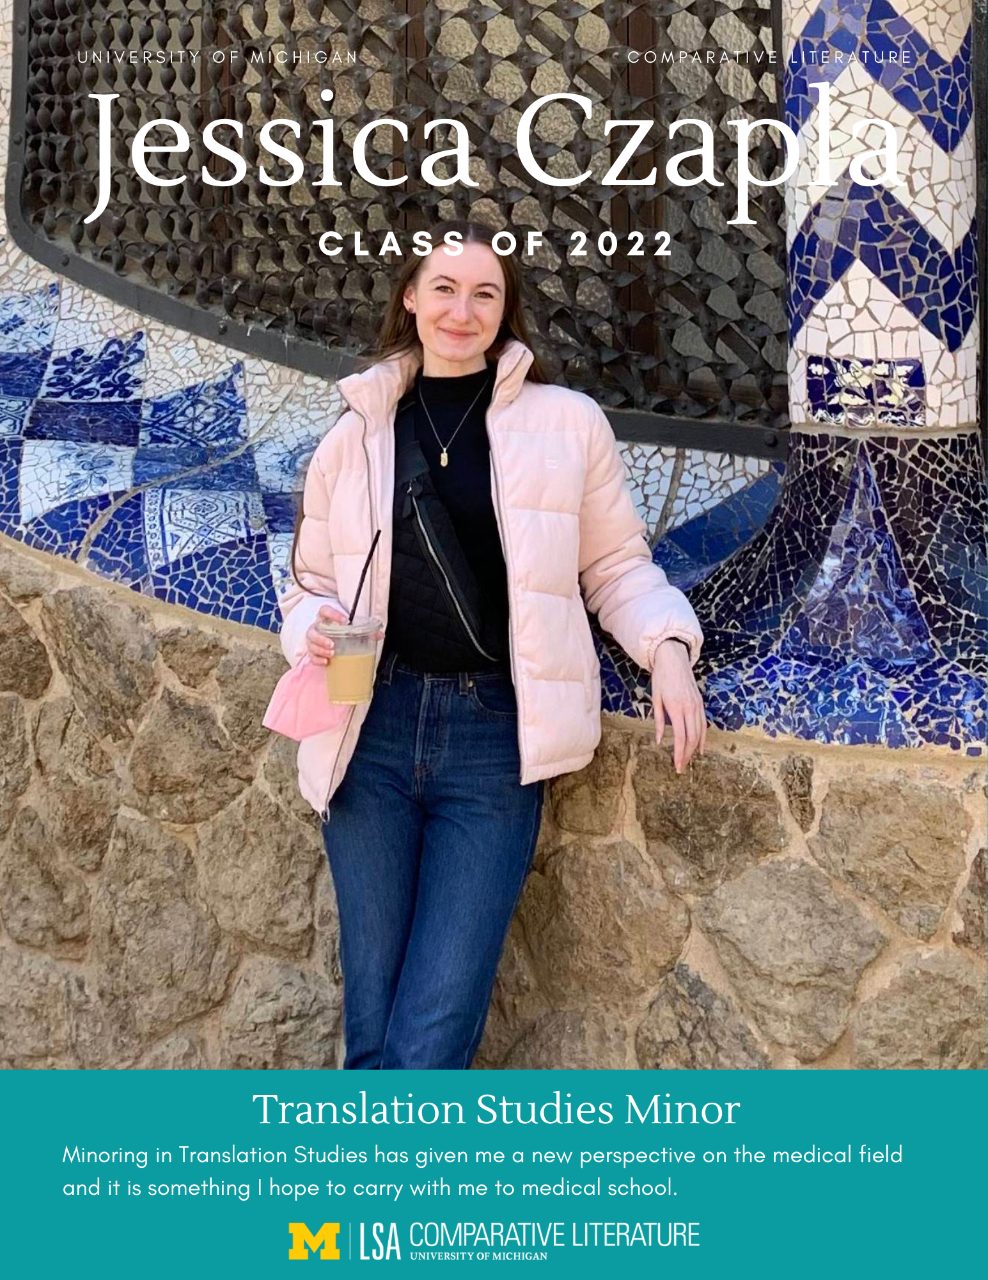 Jessica Czapla in front of a mosaic tiled wall with text, “University of Michigan, Comparative Literature, Jessica Czapla Class of 2022. Translation Studies Minor:  Minoring in Translation Studies has given me a new perspective on the medical field and it is something I hope to carry with me to medical school.”